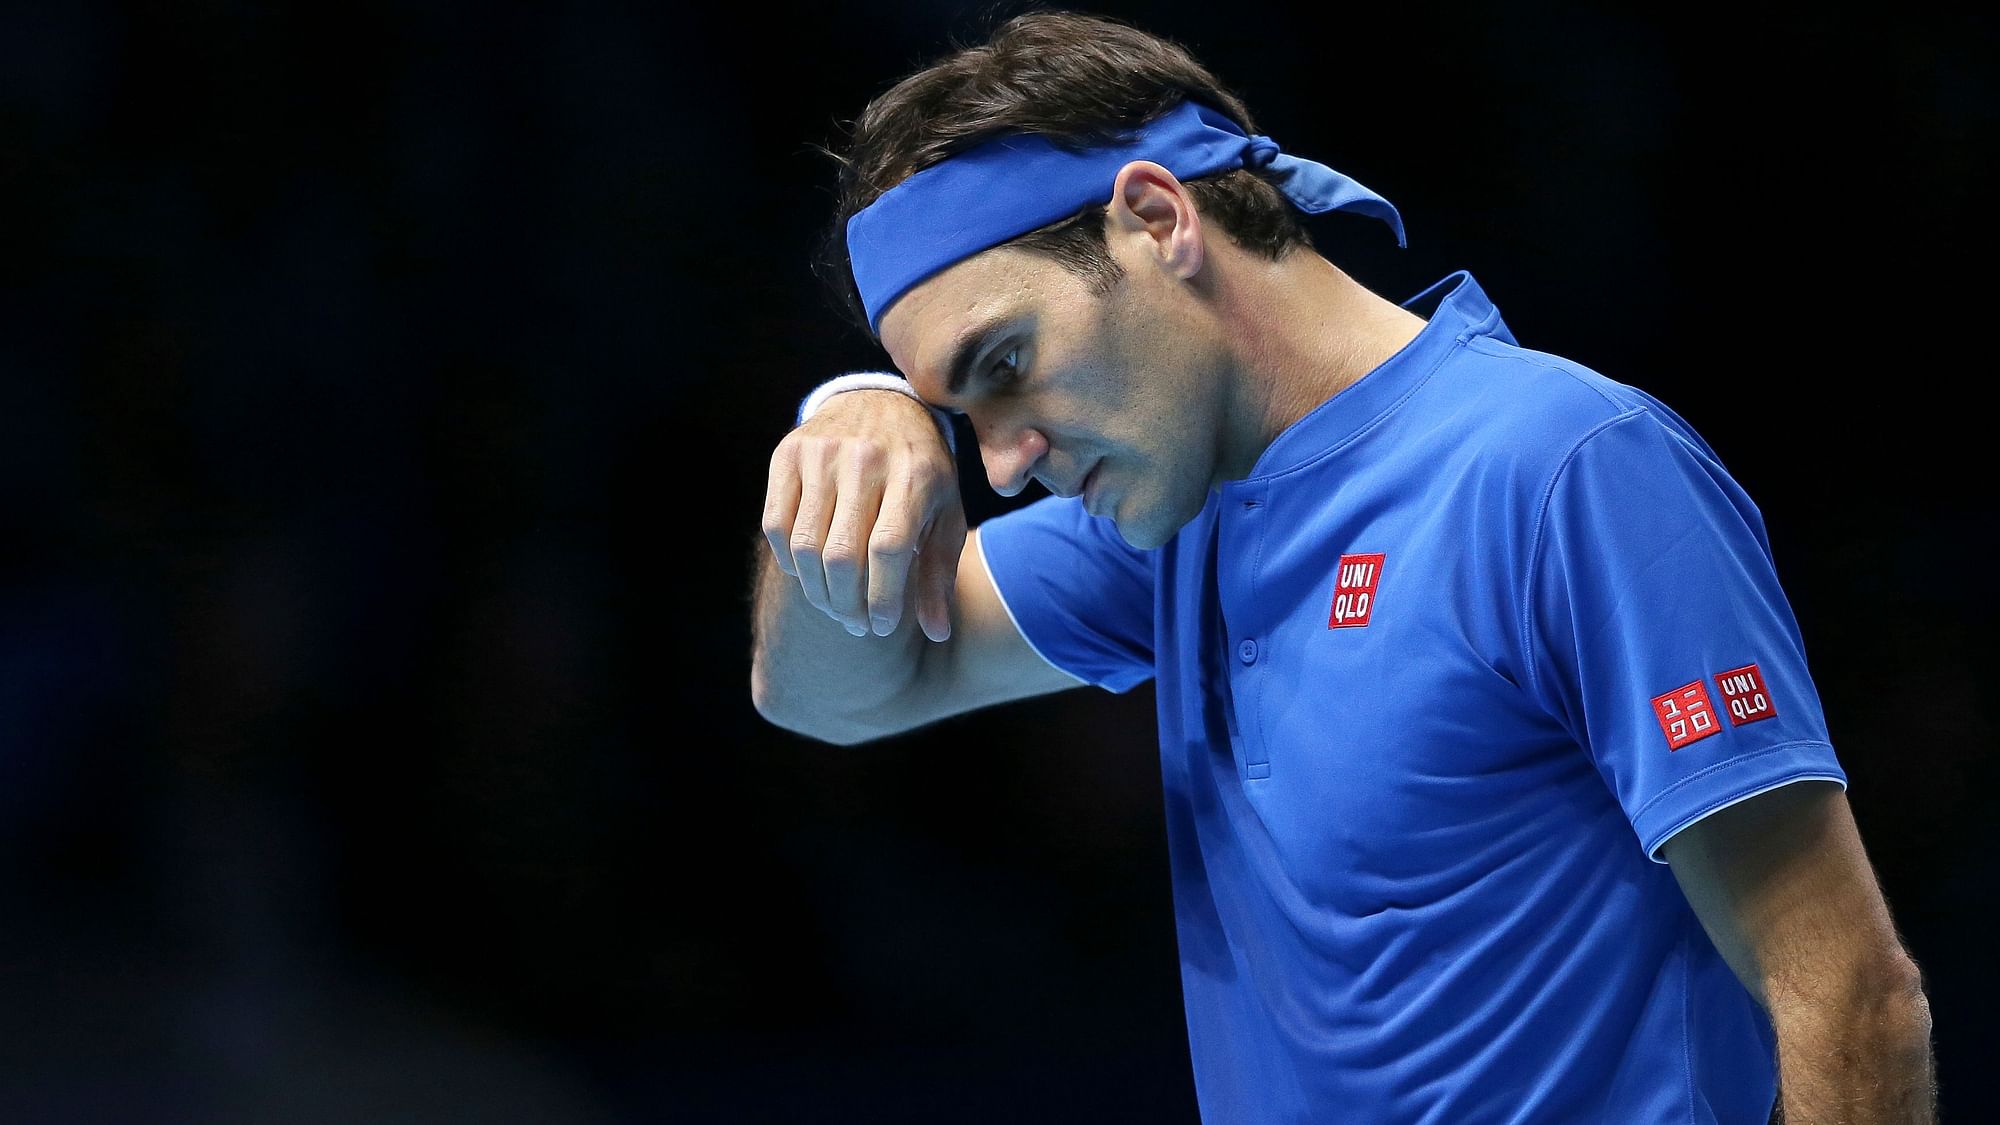 Roger Federer suffered a first opening-match defeat at the ATP Finals since 2013